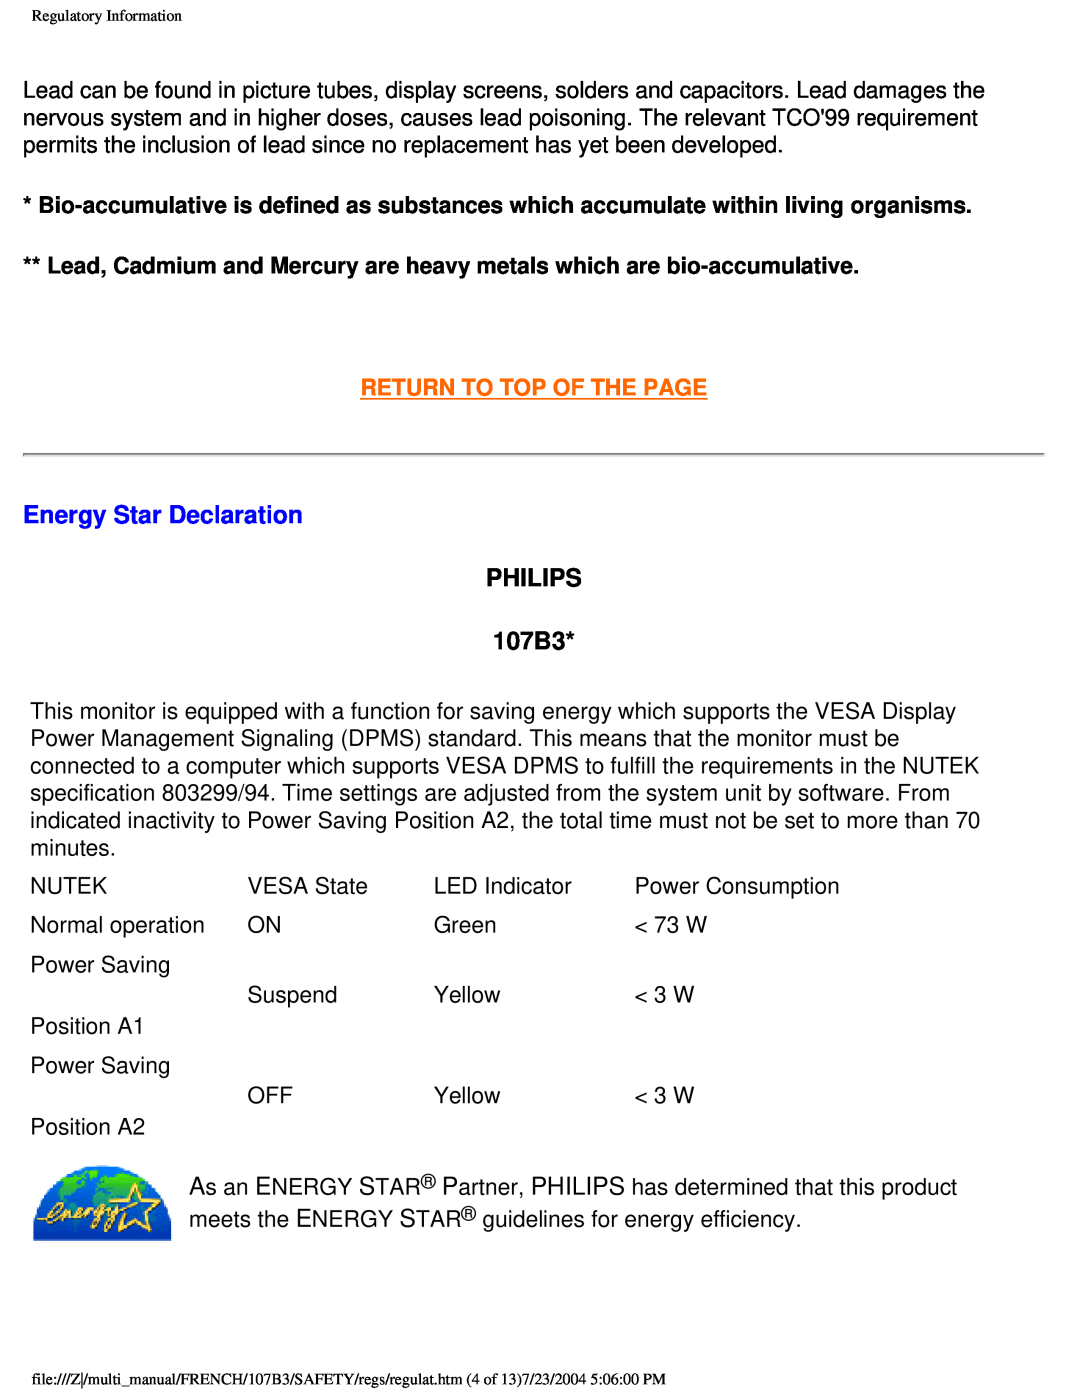 Philips user manual Energy Star Declaration, PHILIPS 107B3, Return To Top Of The Page 